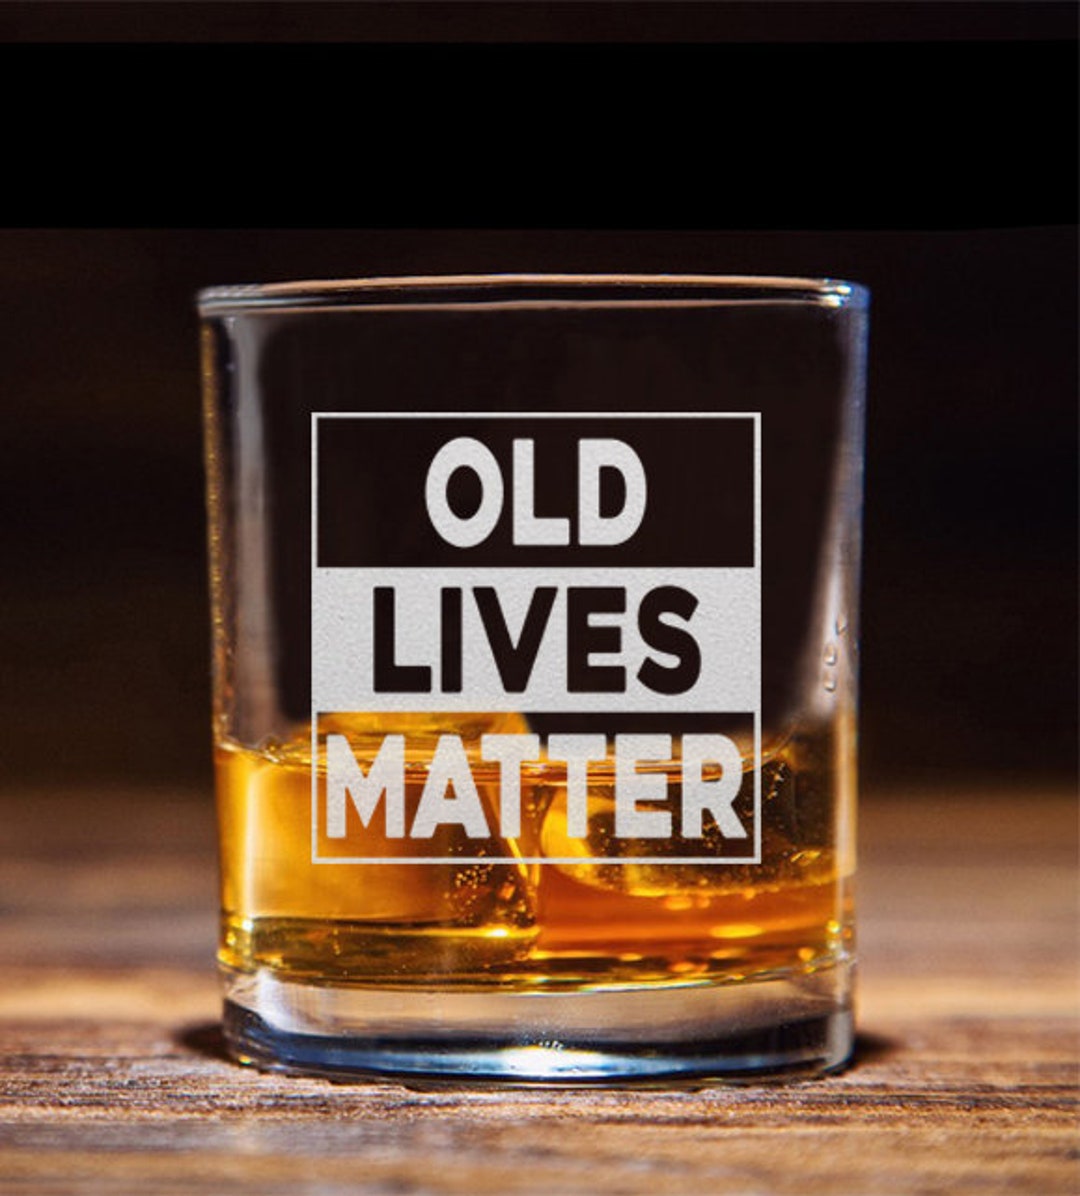 Soho Old Lives Matter Whiskey Glass Gift for Men, 7oz Insulated Double Walled Freezer Drinking Glass (Keeps Drink Iced Cold) Funny Gift for Dad/